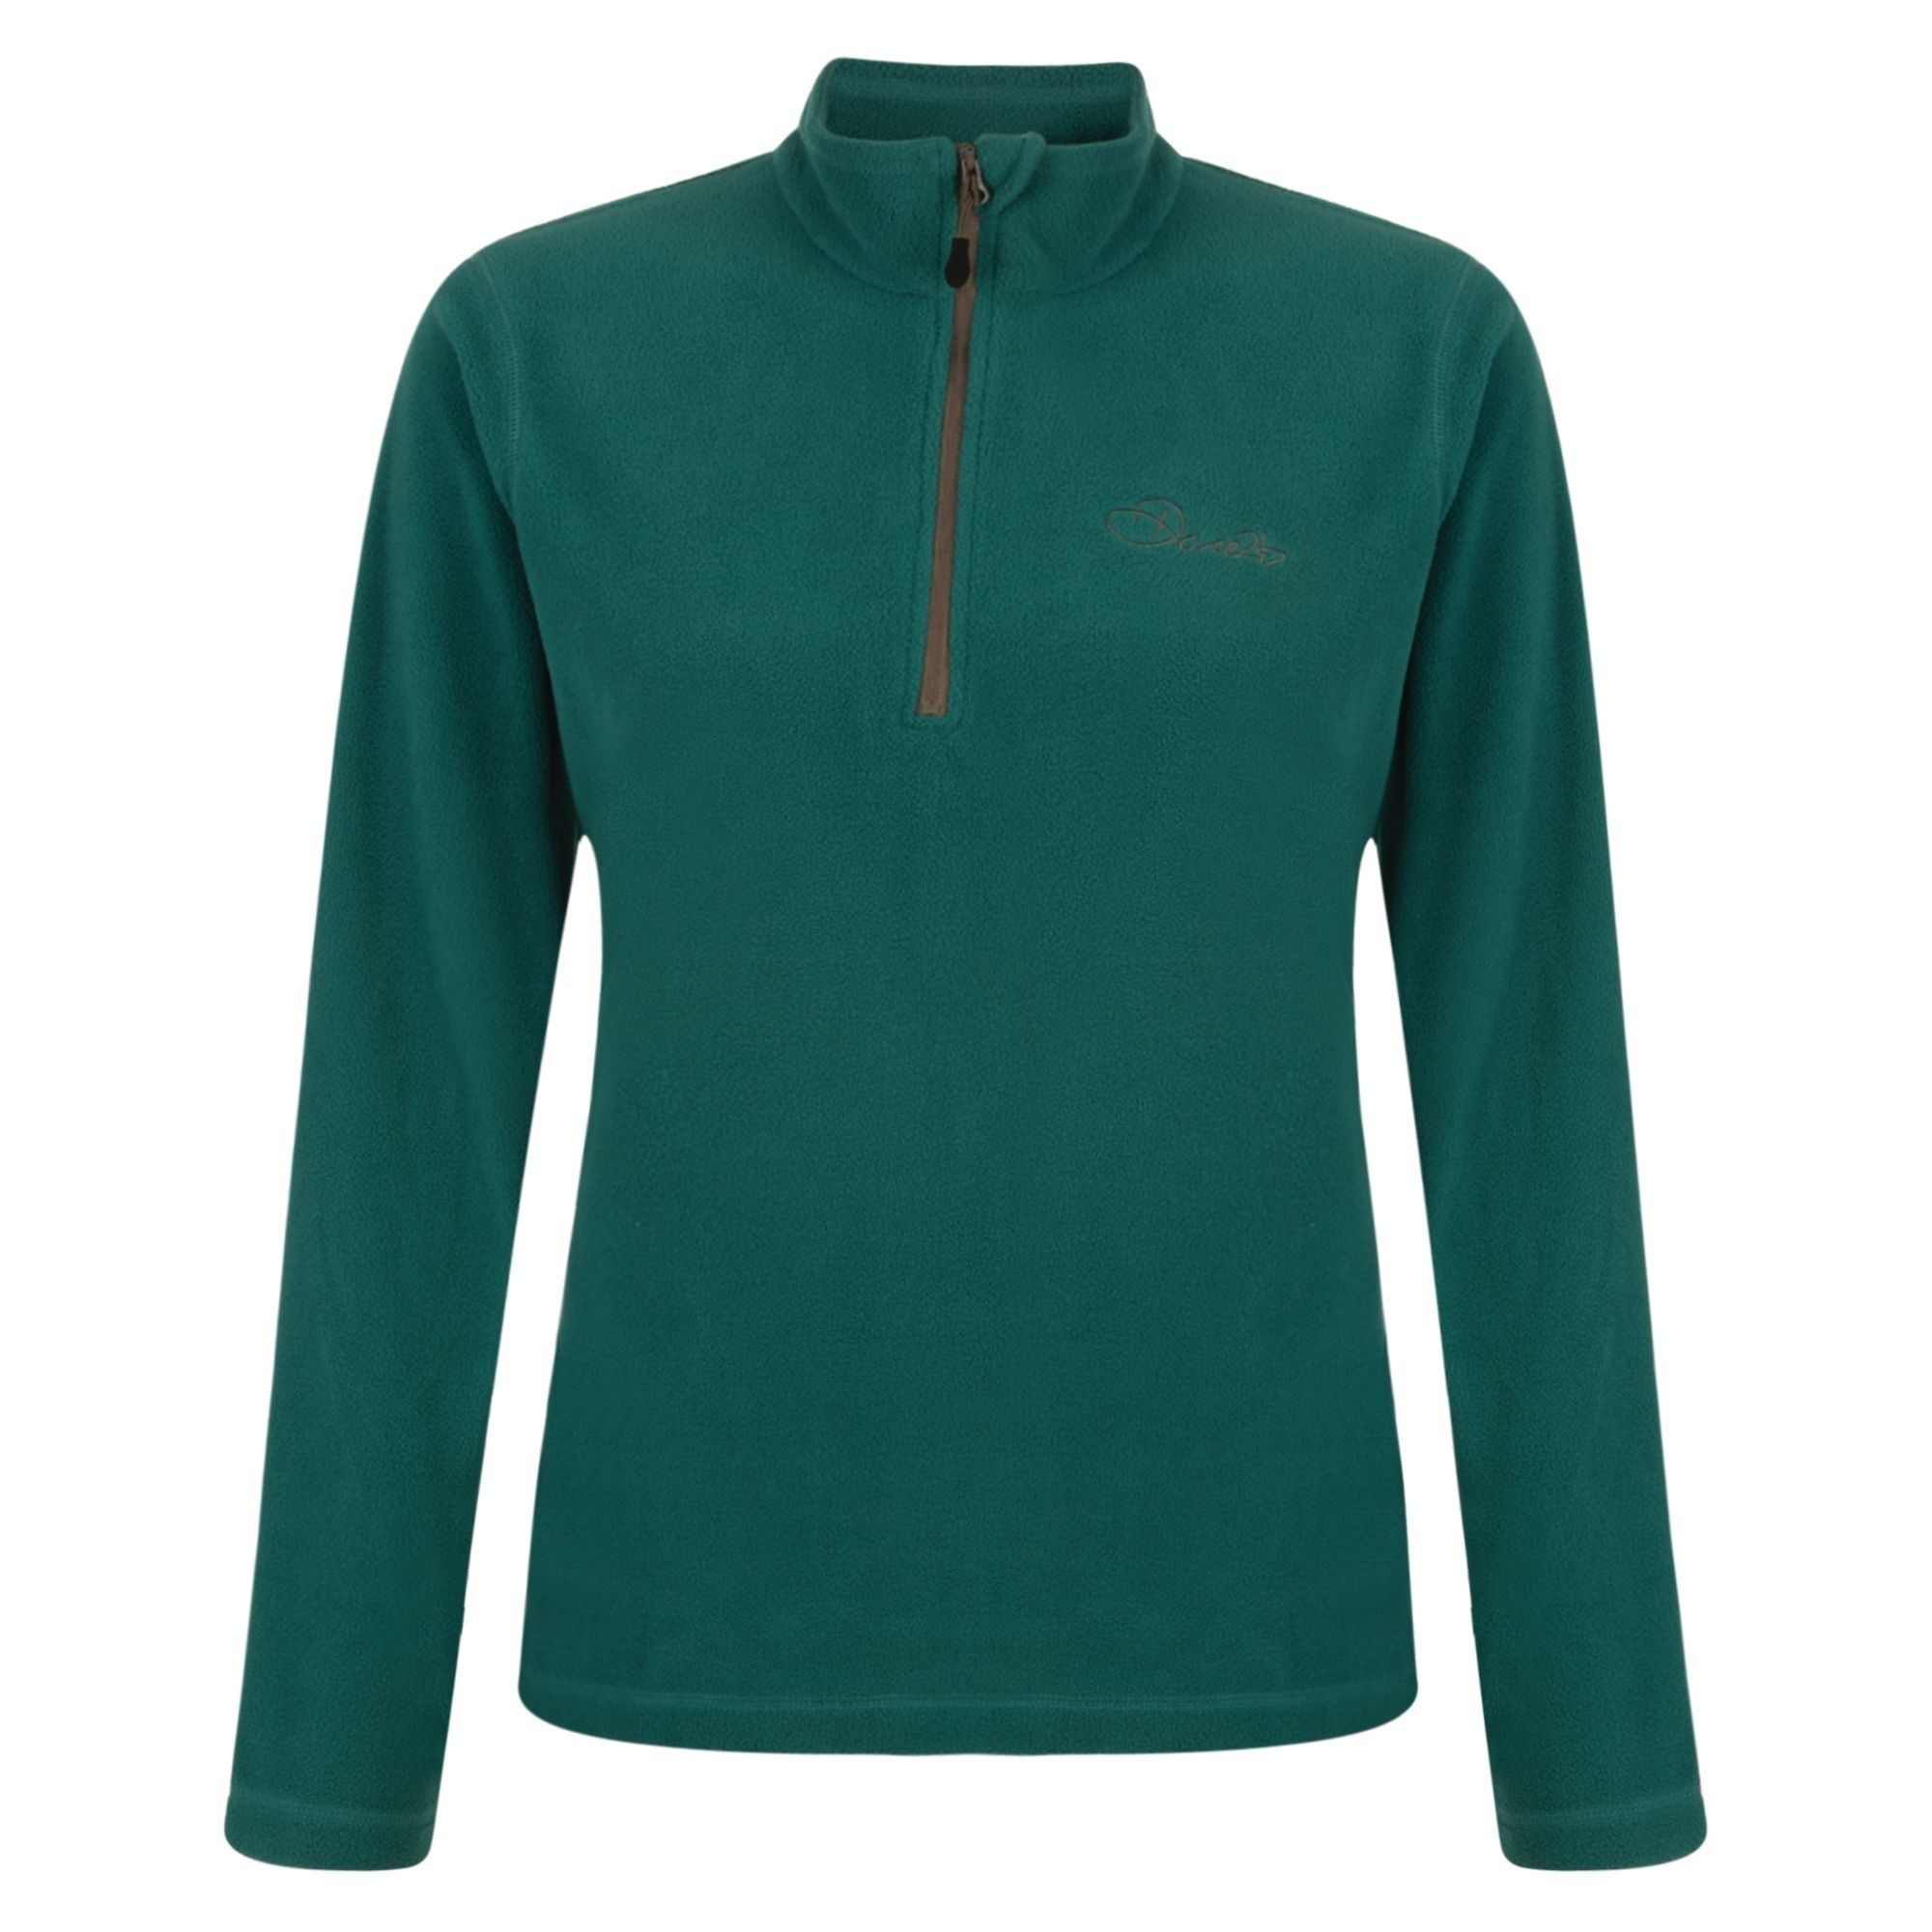 The womens Freeze Dry Fleece from Dare 2b is a year-round classic. Its made using soft, mid-weight microfleece fabric. The inner is brushed for added comfort and the outer has an anti-pill finish to help stop it getting bobbly. Complete with a half-zip fastening, its your grab it and go piece for the mountains. Half zip. Inner zip & chin guard. 100% Polyester. Dare 2B Womens Sizing (chest approx): 6 (30in/76cm), 8 (32in/81cm), 10 (34in/86cm), 12 (36in/92cm), 14 (38in/97cm), 16 (40in/102cm), 18 (42in/107cm), 20 (44in/112cm), 22 (46in/117cm), 24 (48in/122cm).